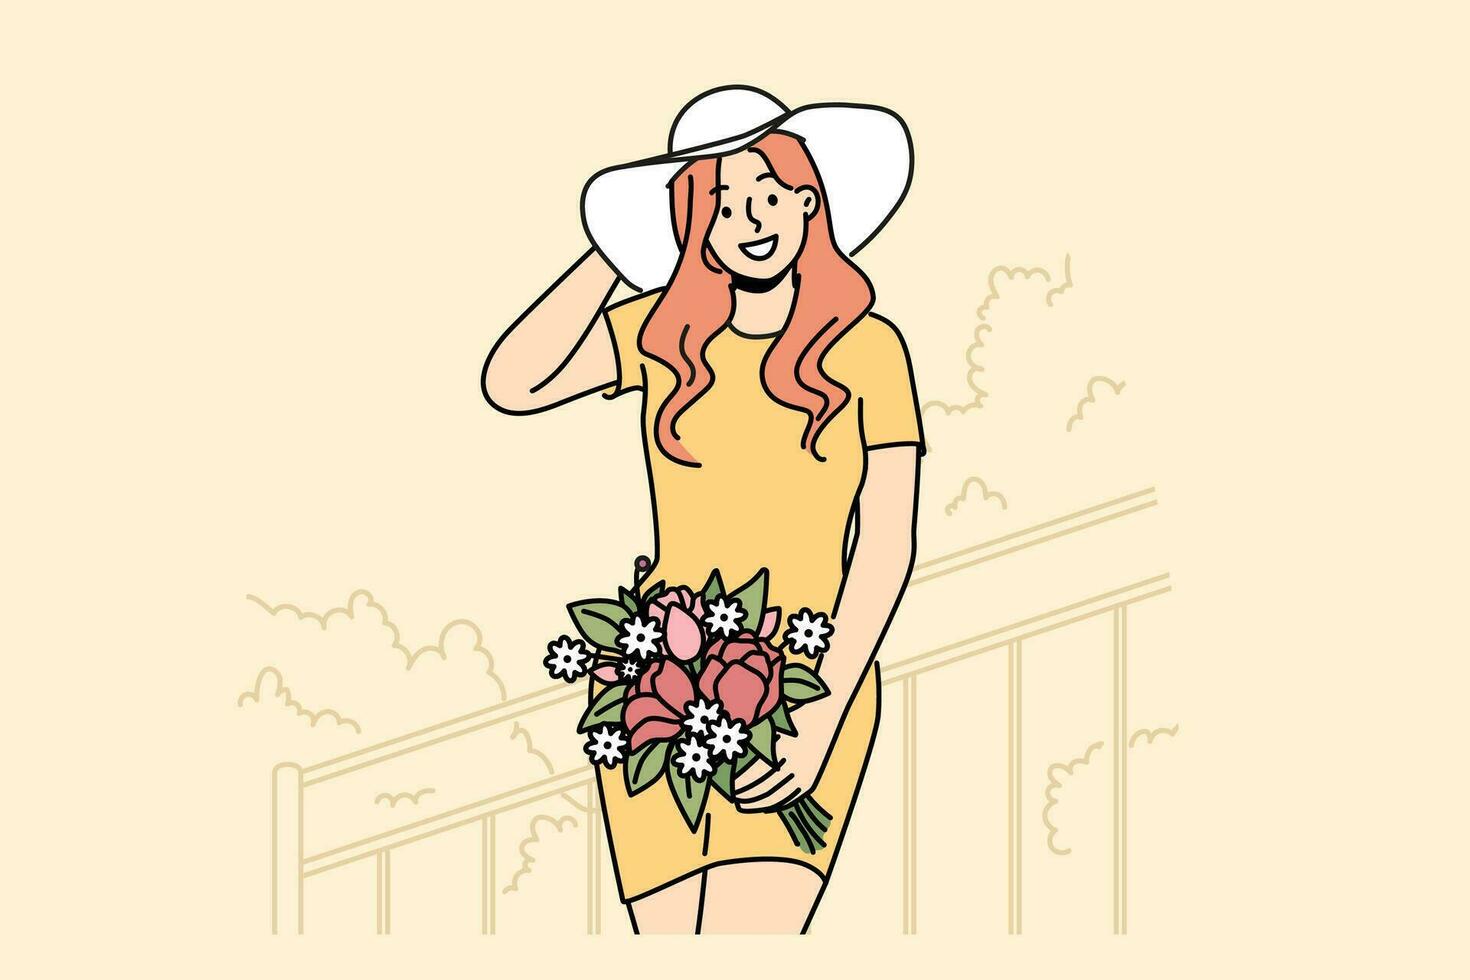 Smiling woman in hat posing with flowers on stairs. Happy girl holding bouquet enjoy summer day. Vector illustration.